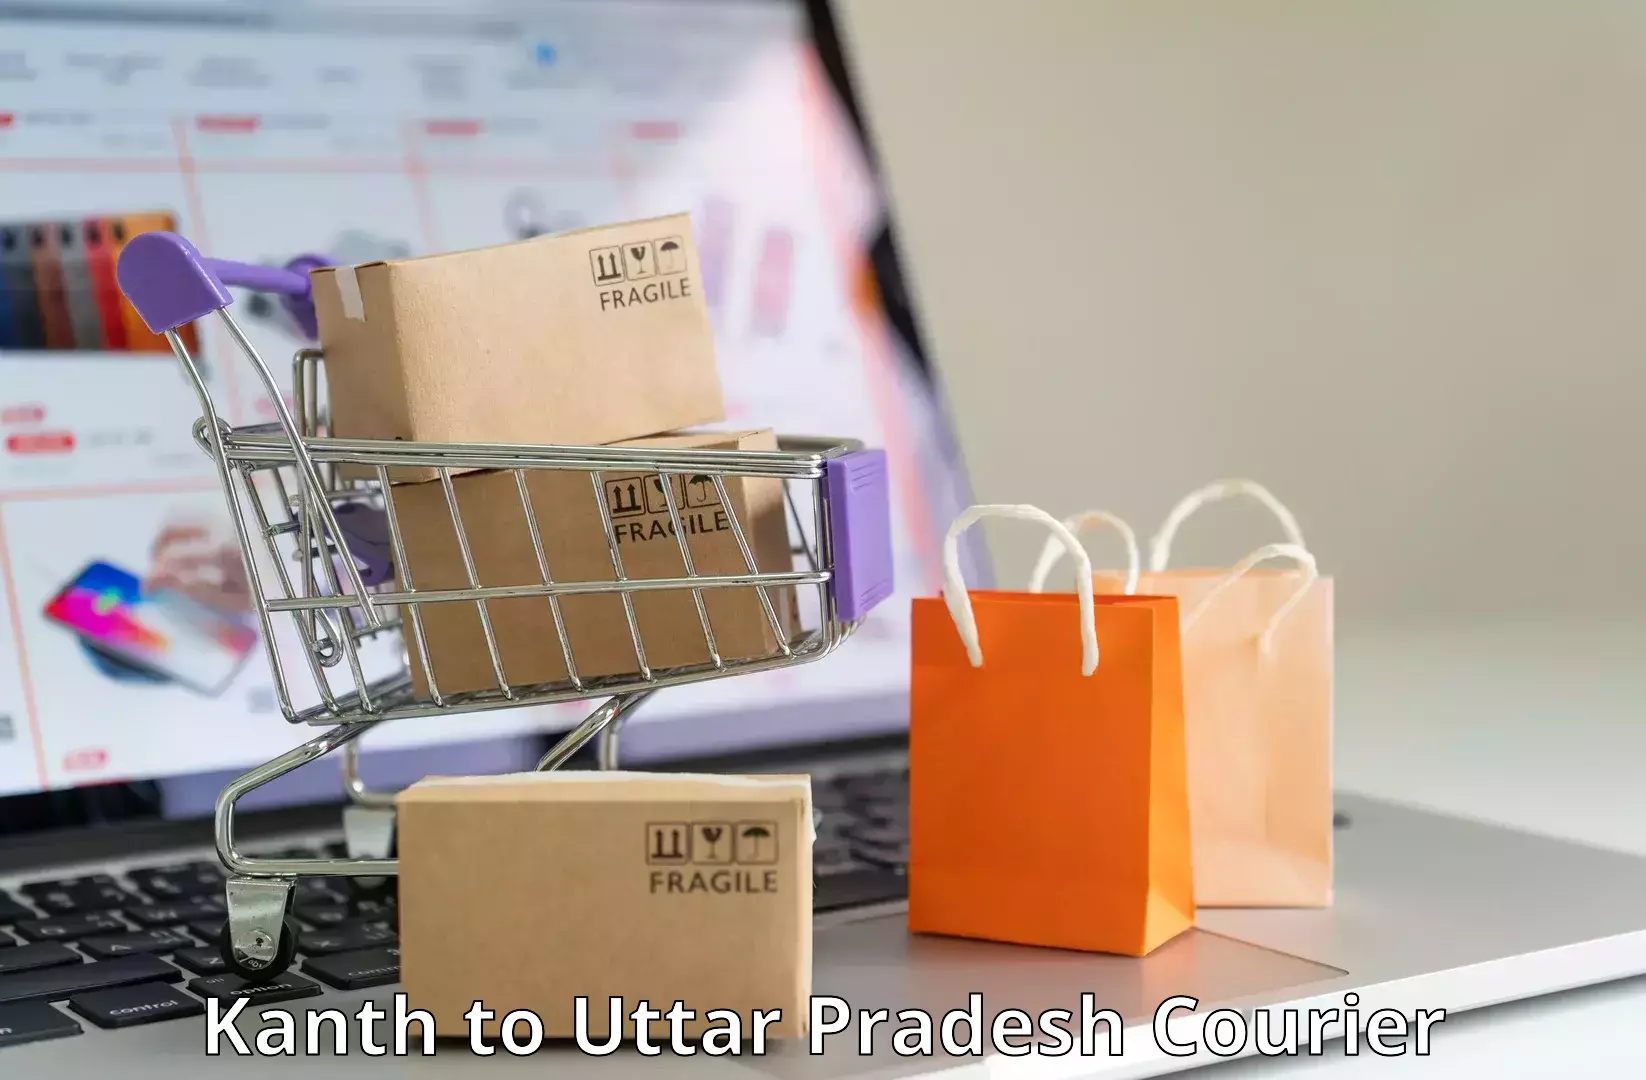 24-hour courier service Kanth to Bhadohi